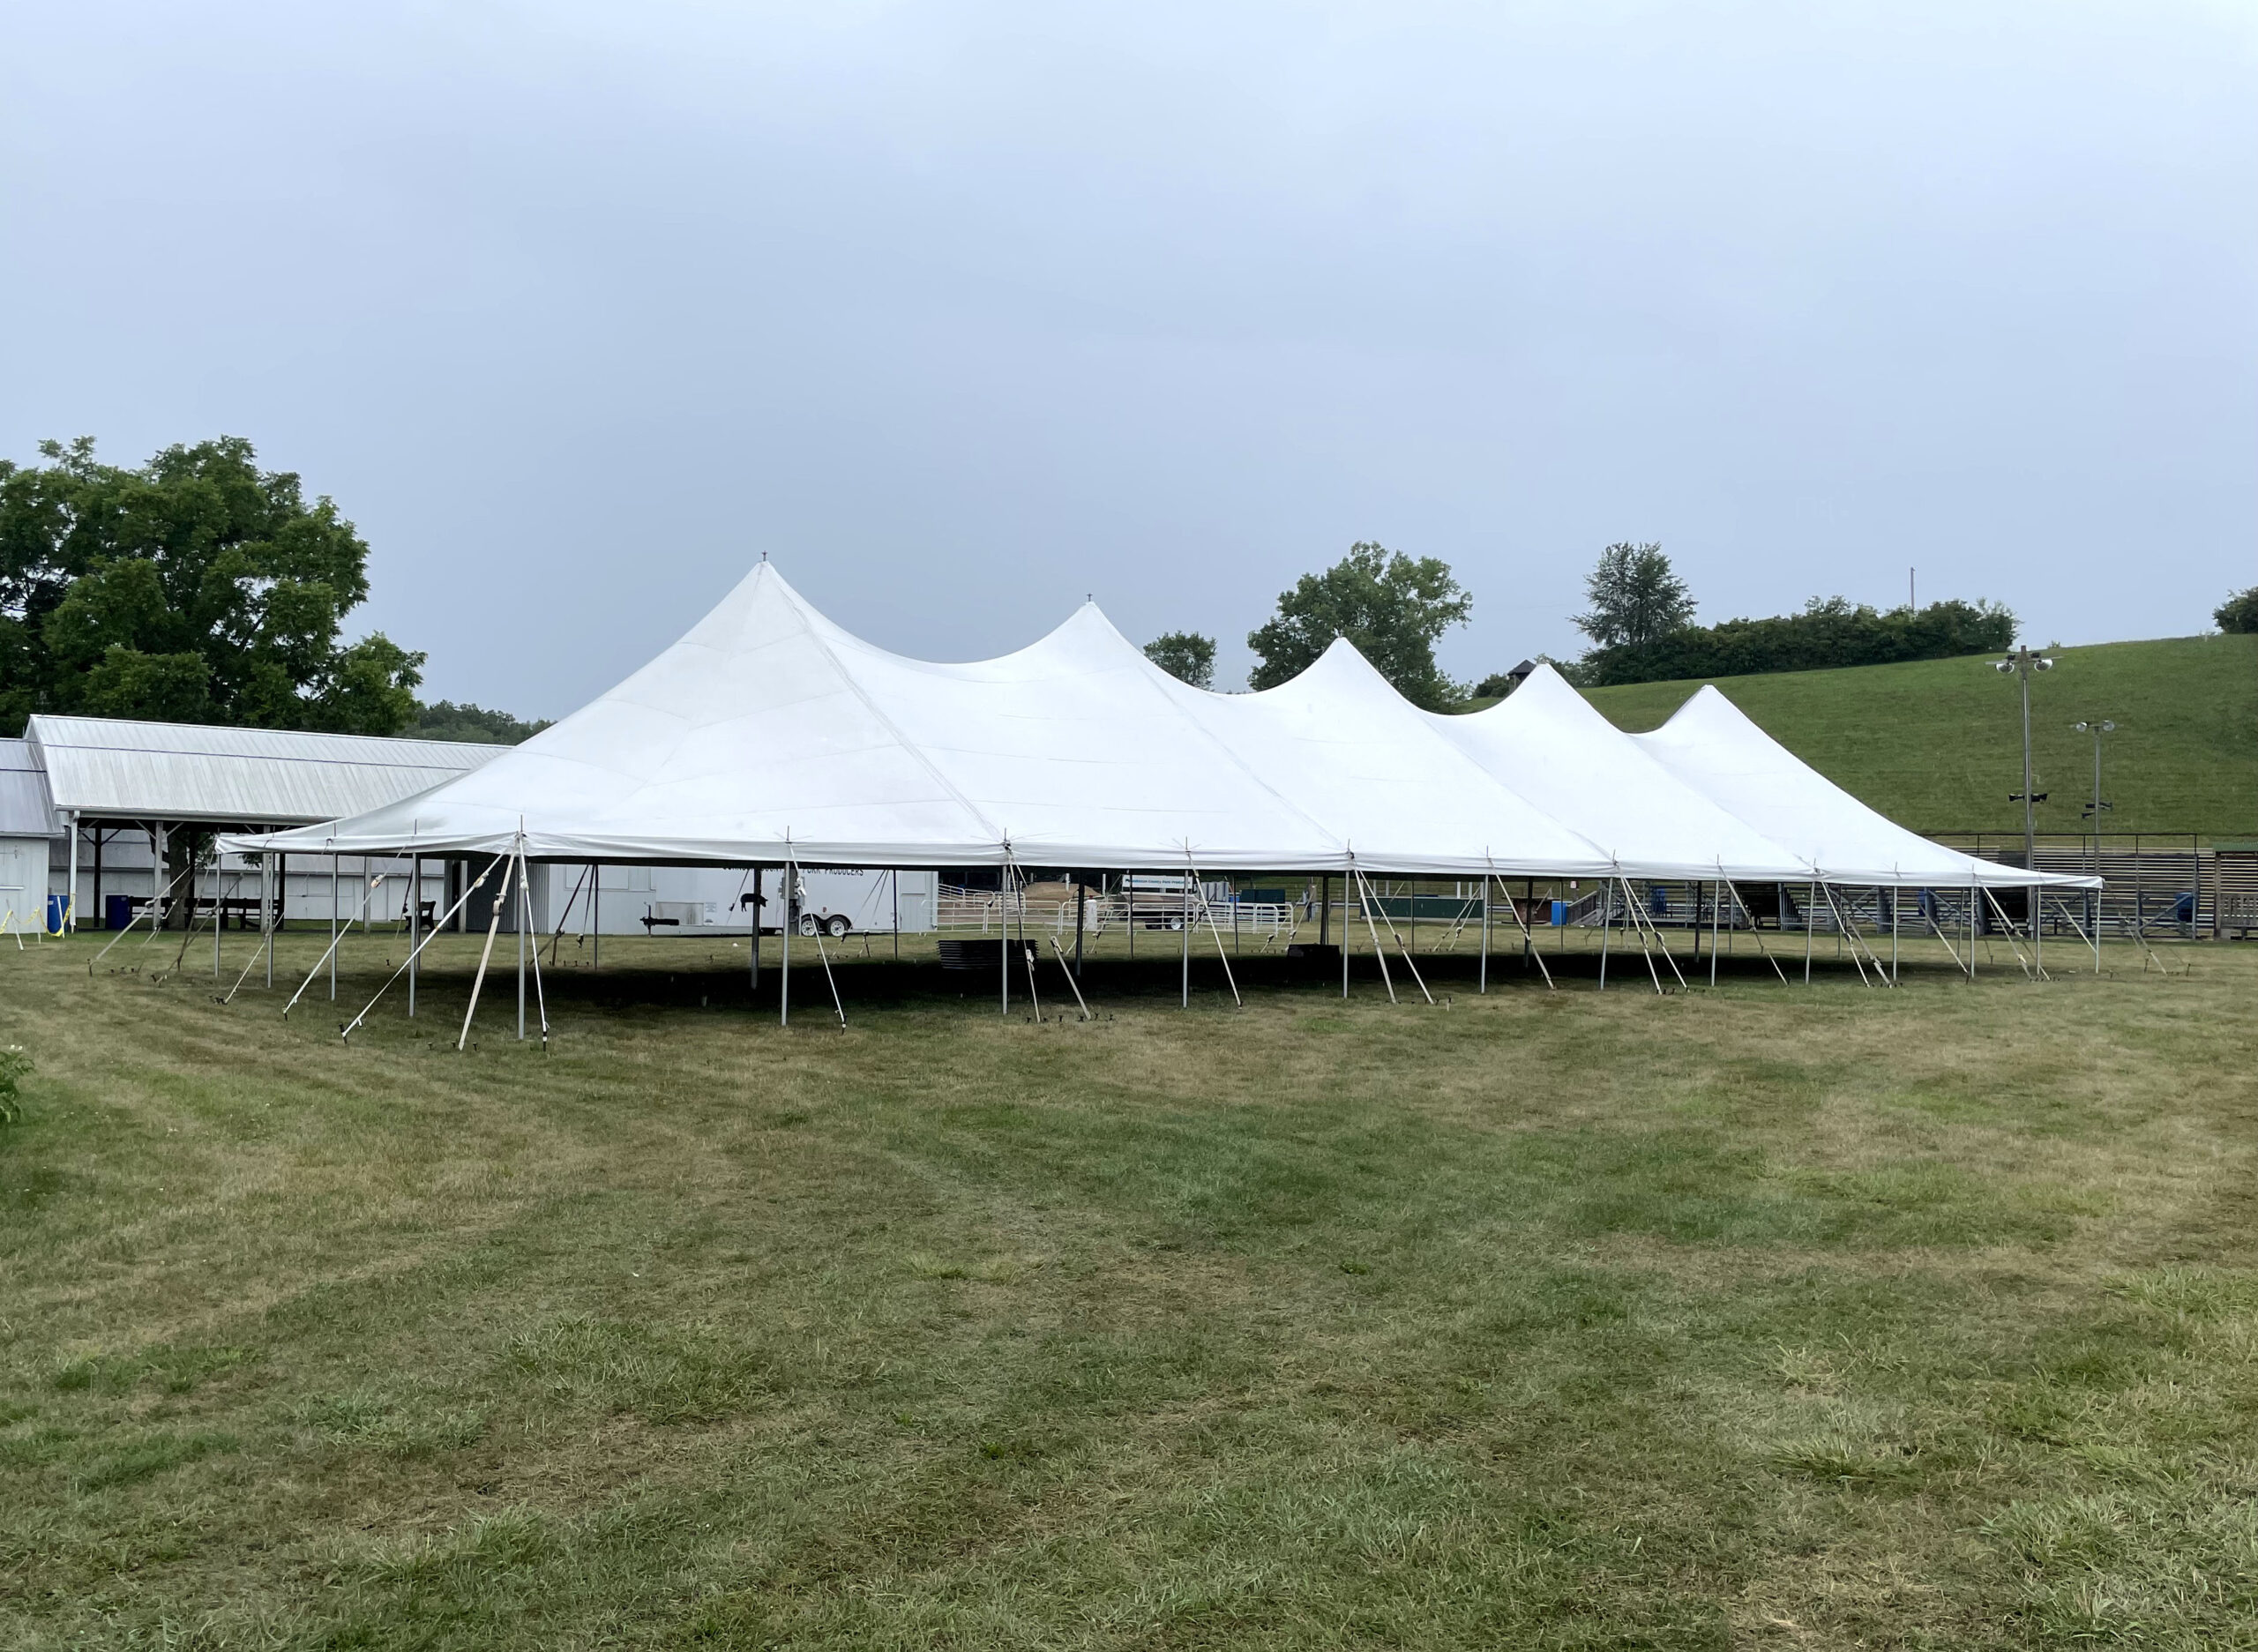 40' x 120' rope and pole tent at the Get WET Get WILD Foam Party at Johnson County Fairgrounds in Iowa City, IA